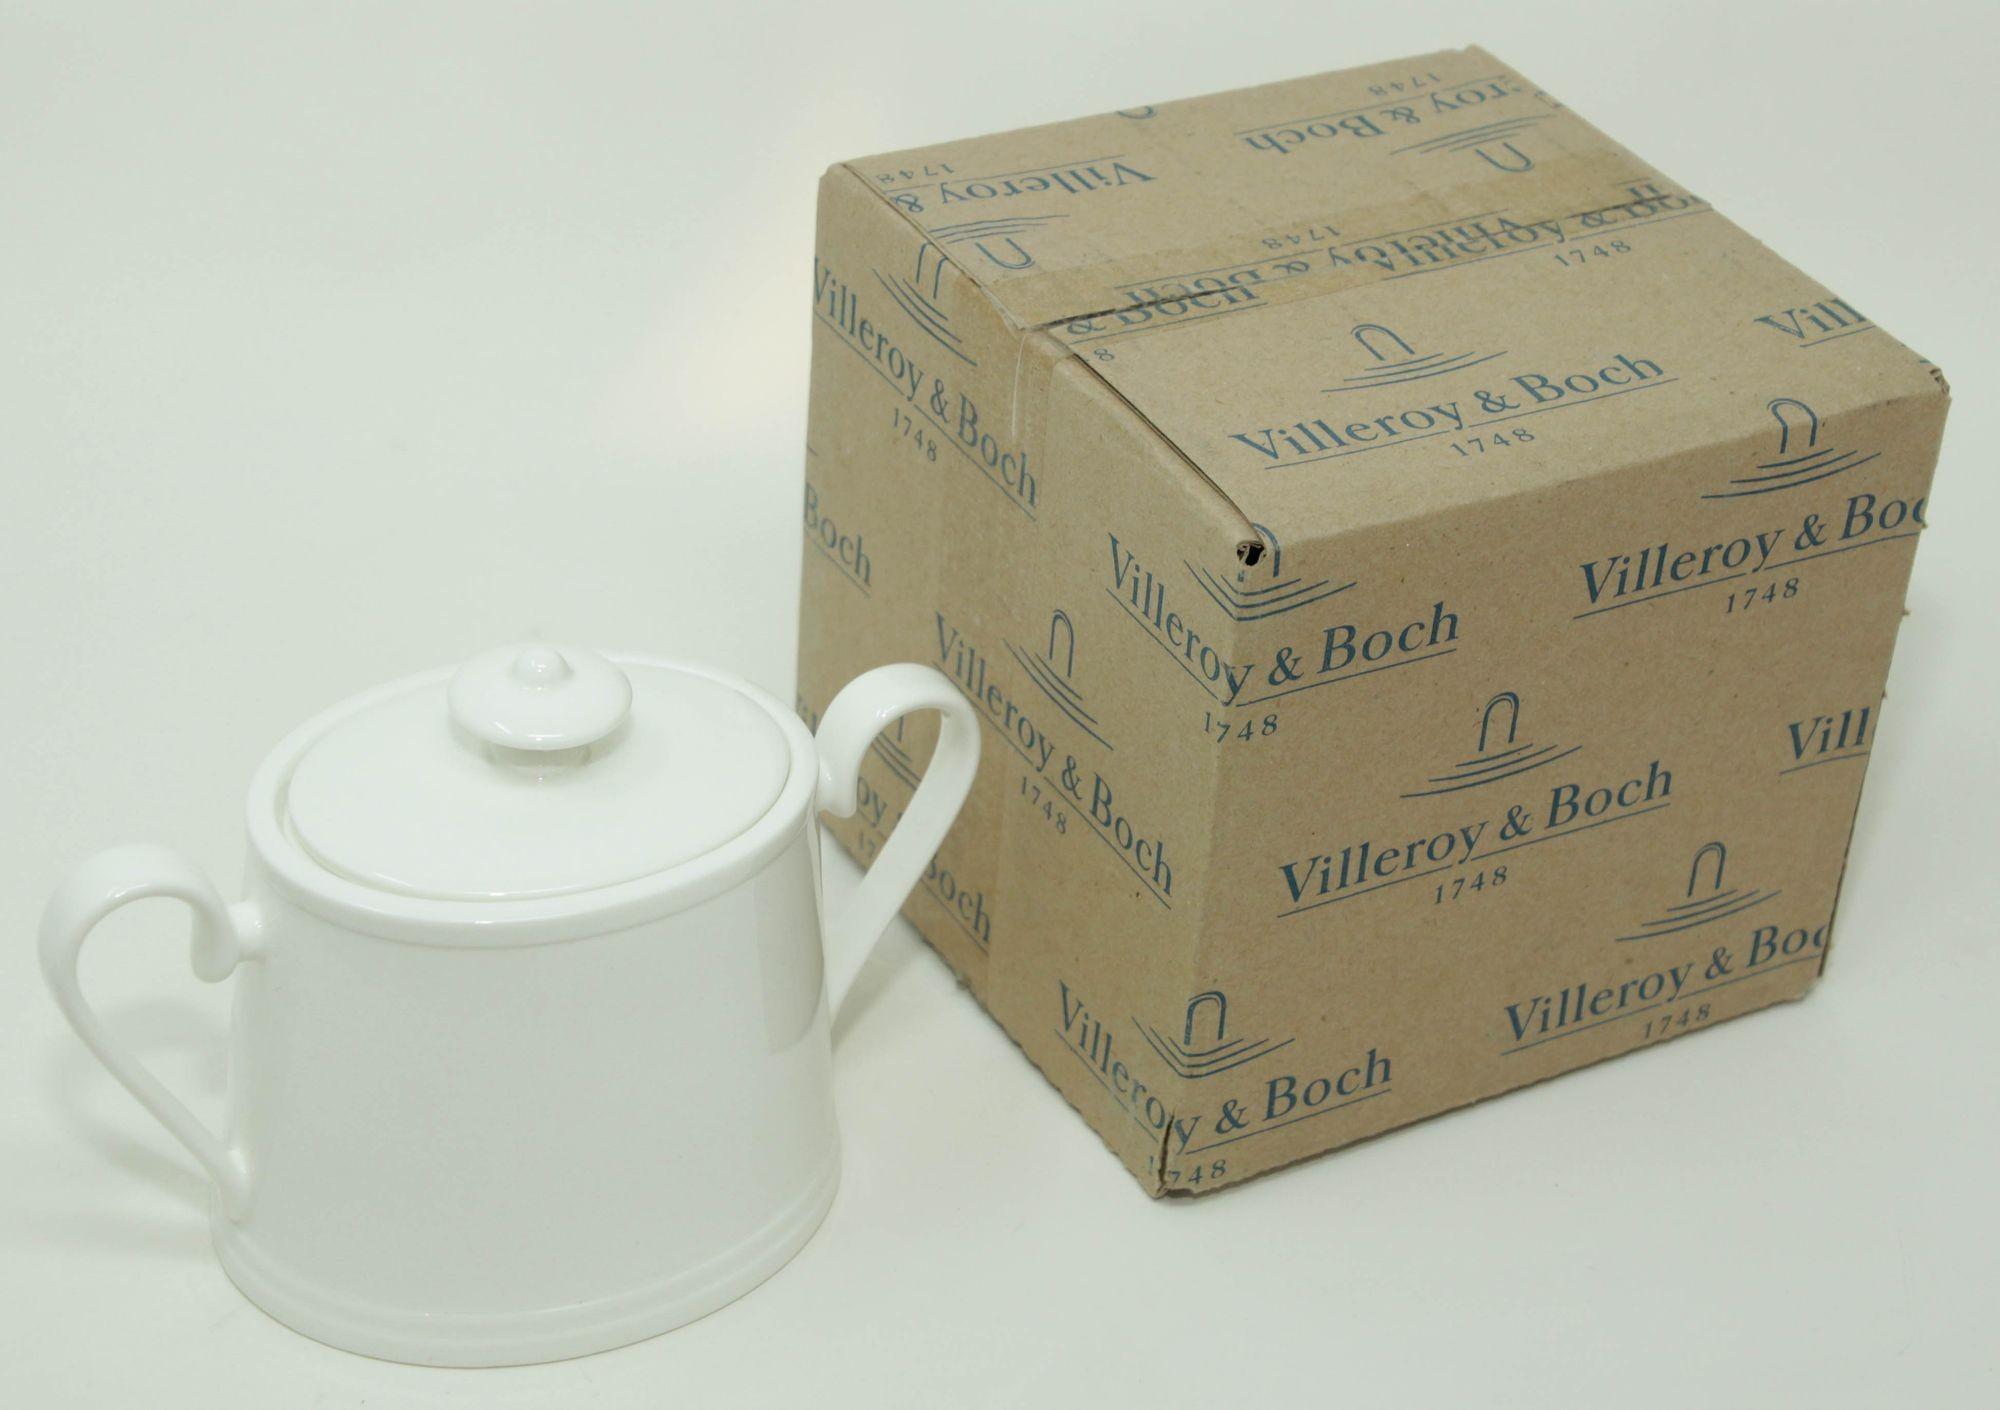 Villeroy & Boch Stella Hotel white Bone China Sugar Bowl with Cover For Sale 3